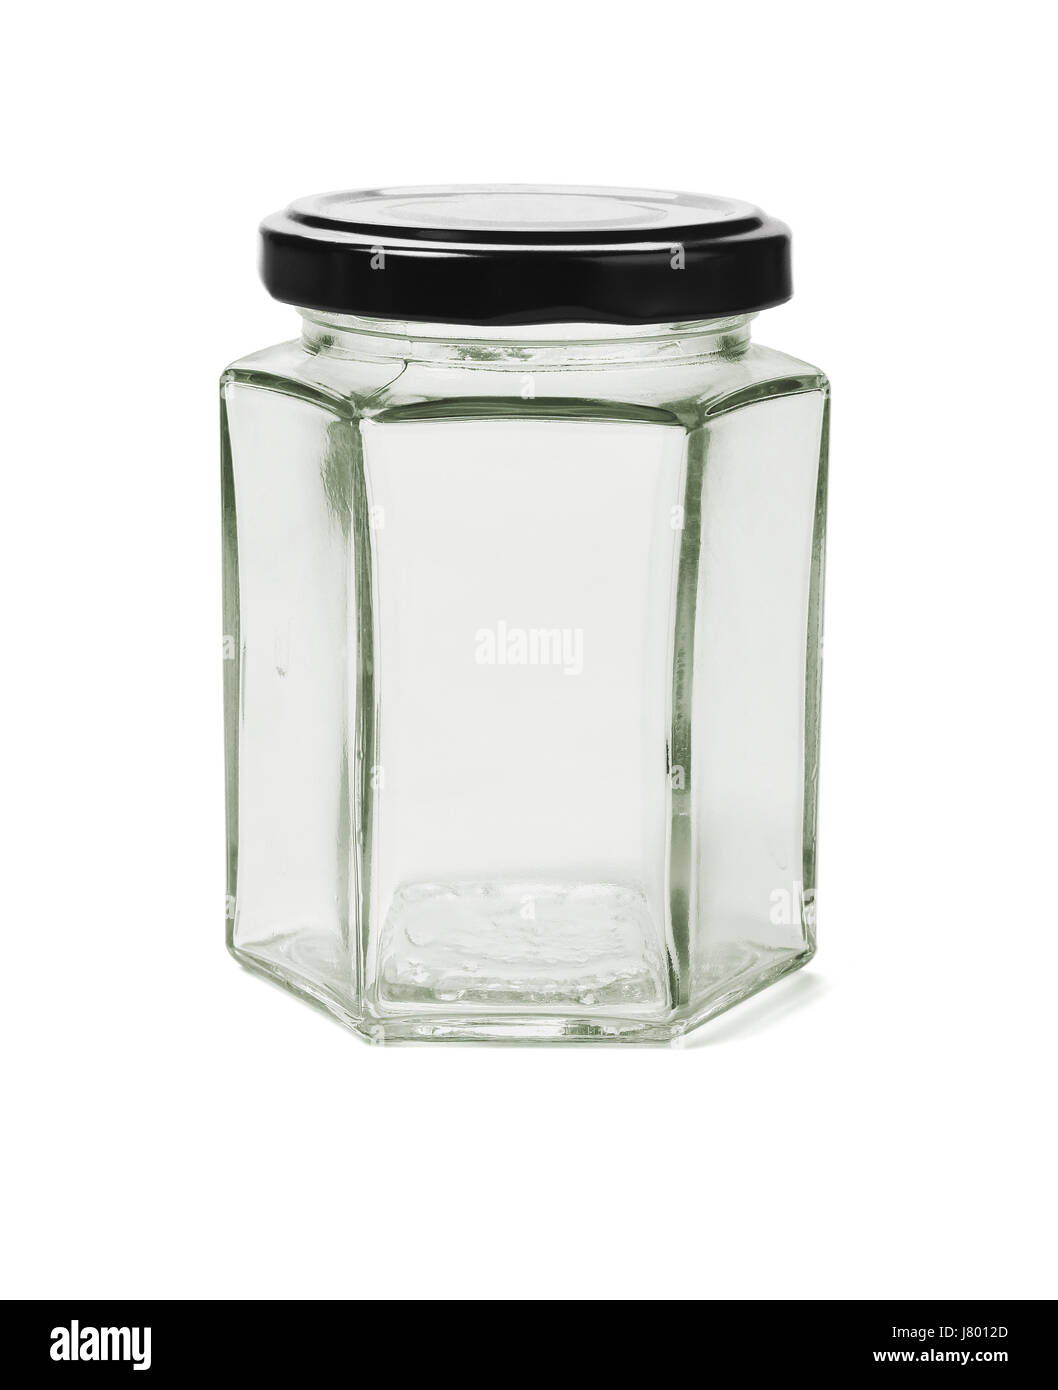 Hexagonal Shape Glass Container on White Background Stock Photo